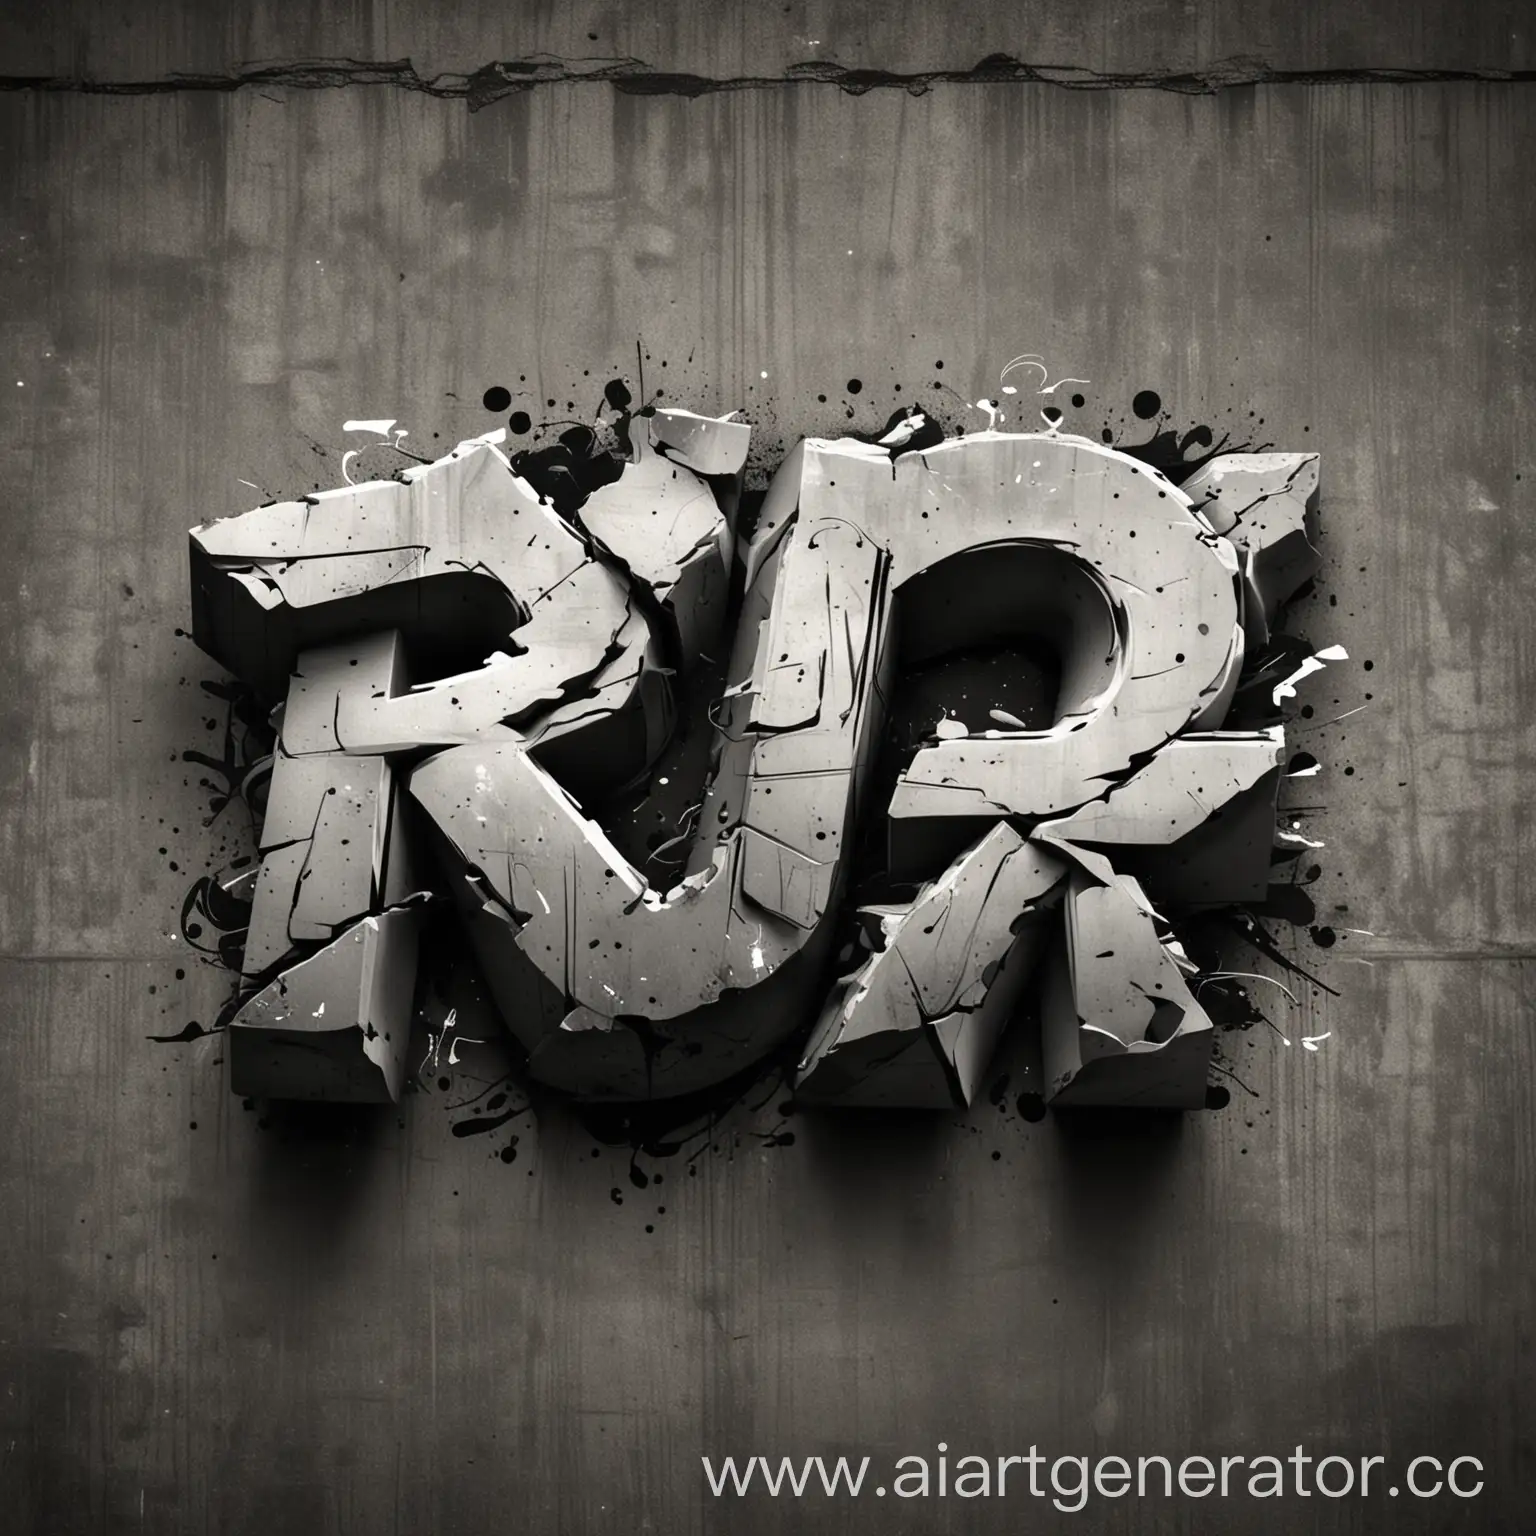 Dynamic-and-Modern-Typographic-Design-with-Graffiti-Elements